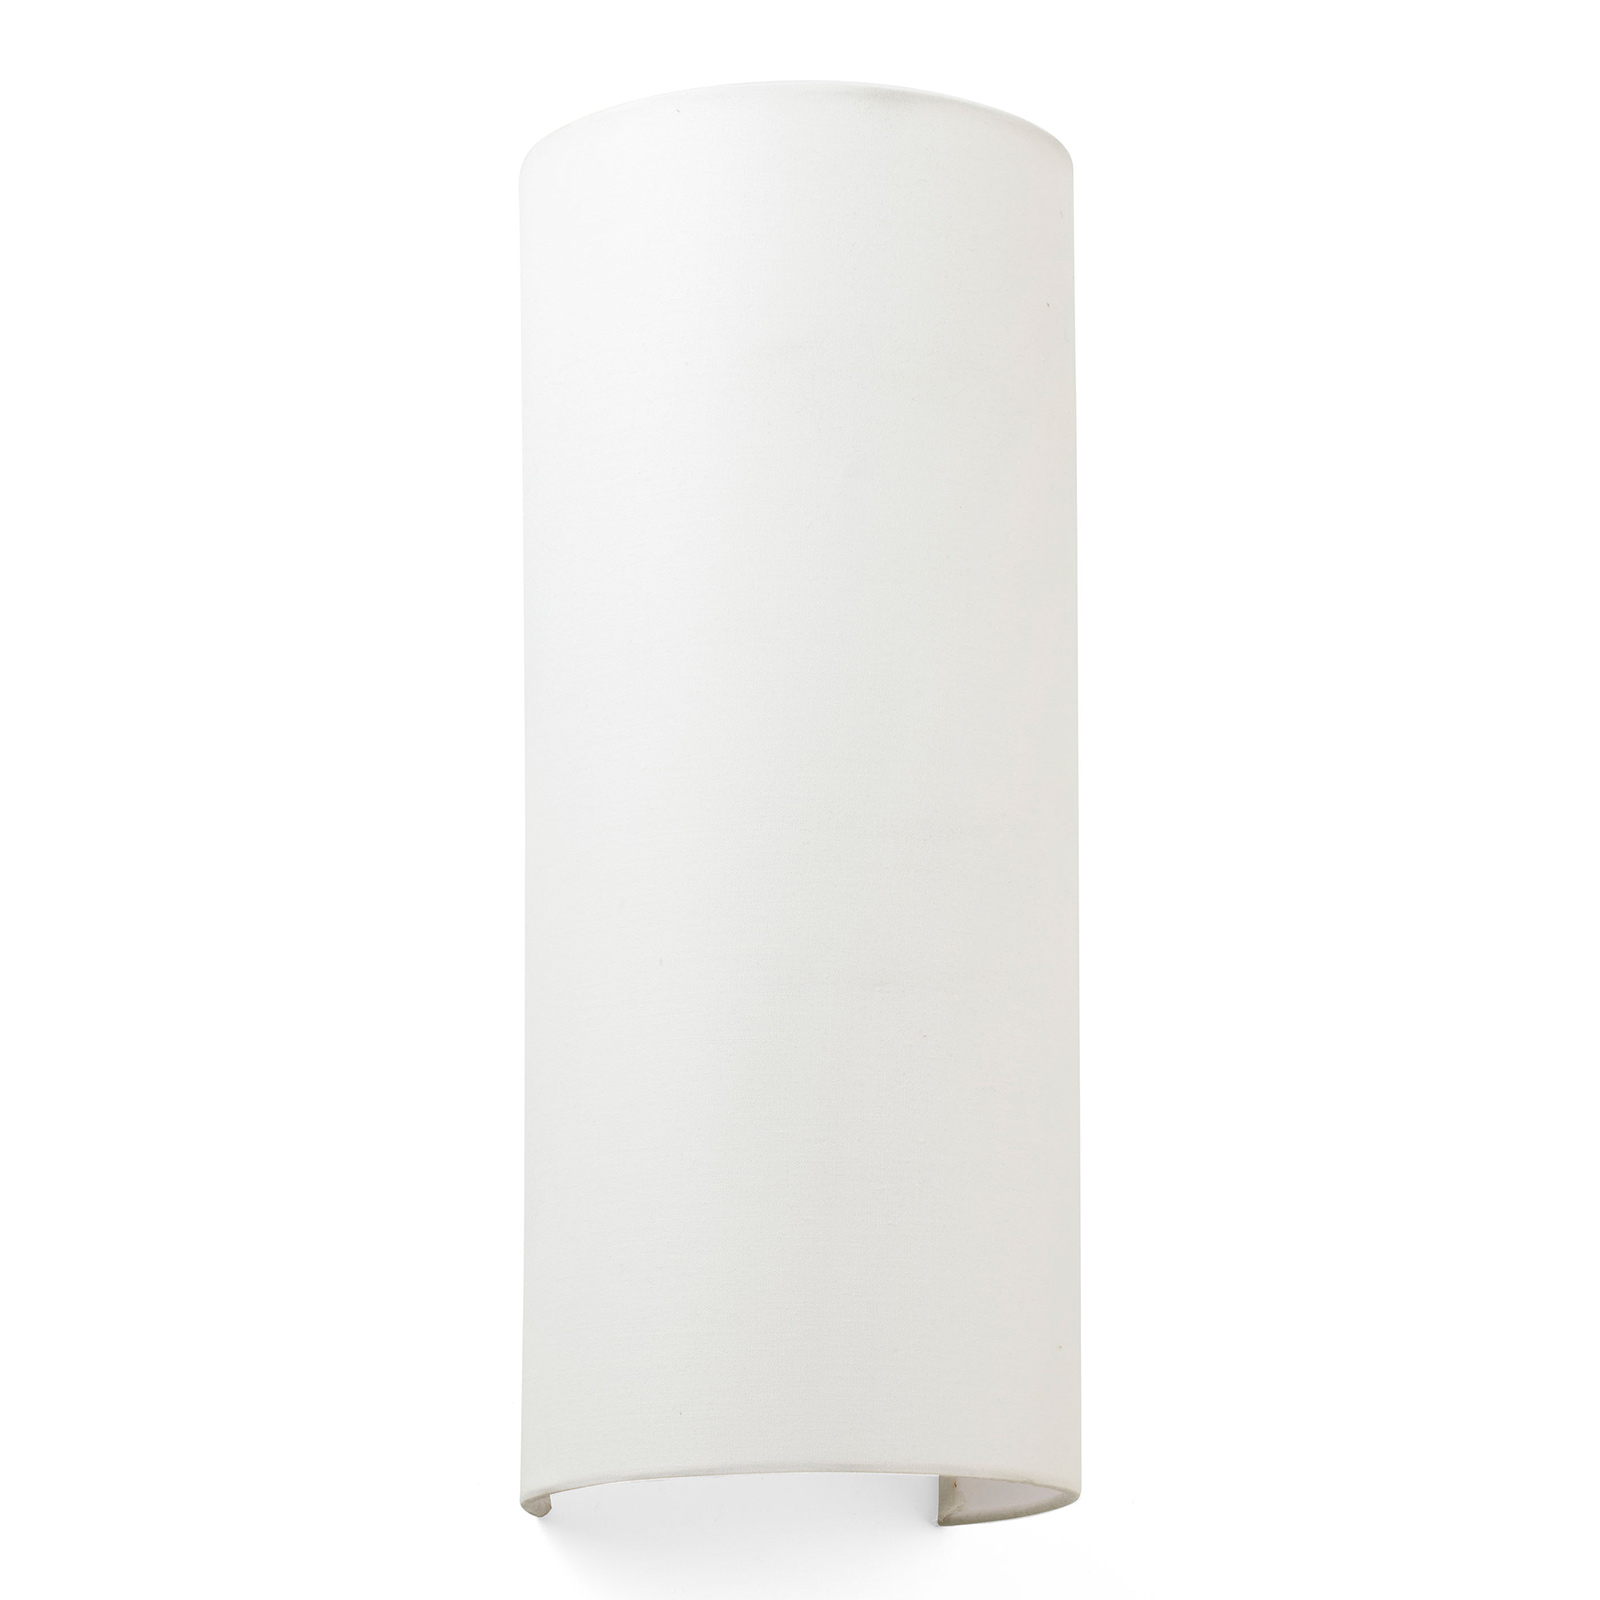 Cotton wall light, curved, 37 x 15 cm, beige